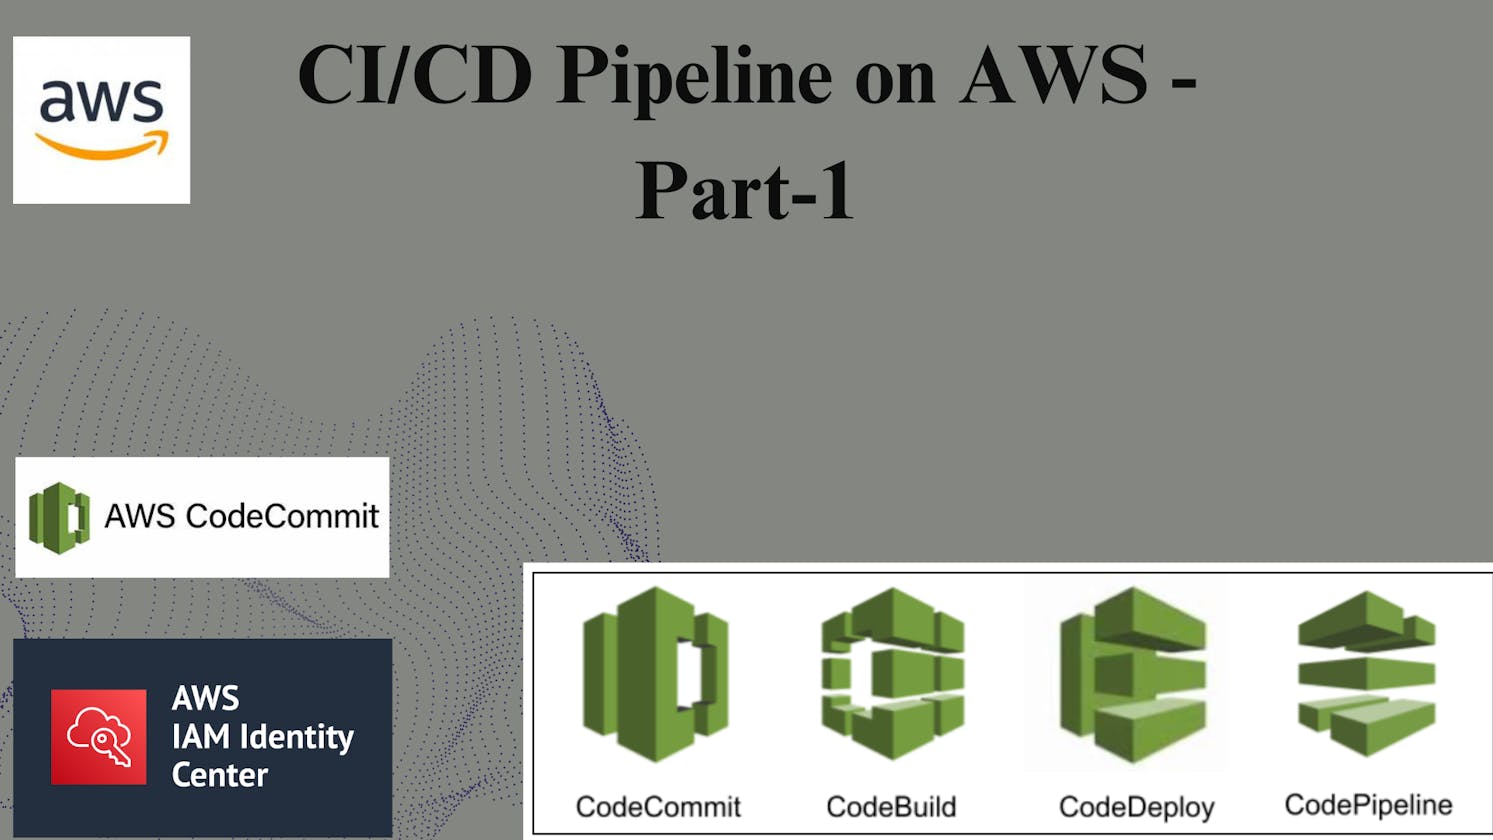 CI/CD Pipeline on AWS - Part-1 (Code Commit)